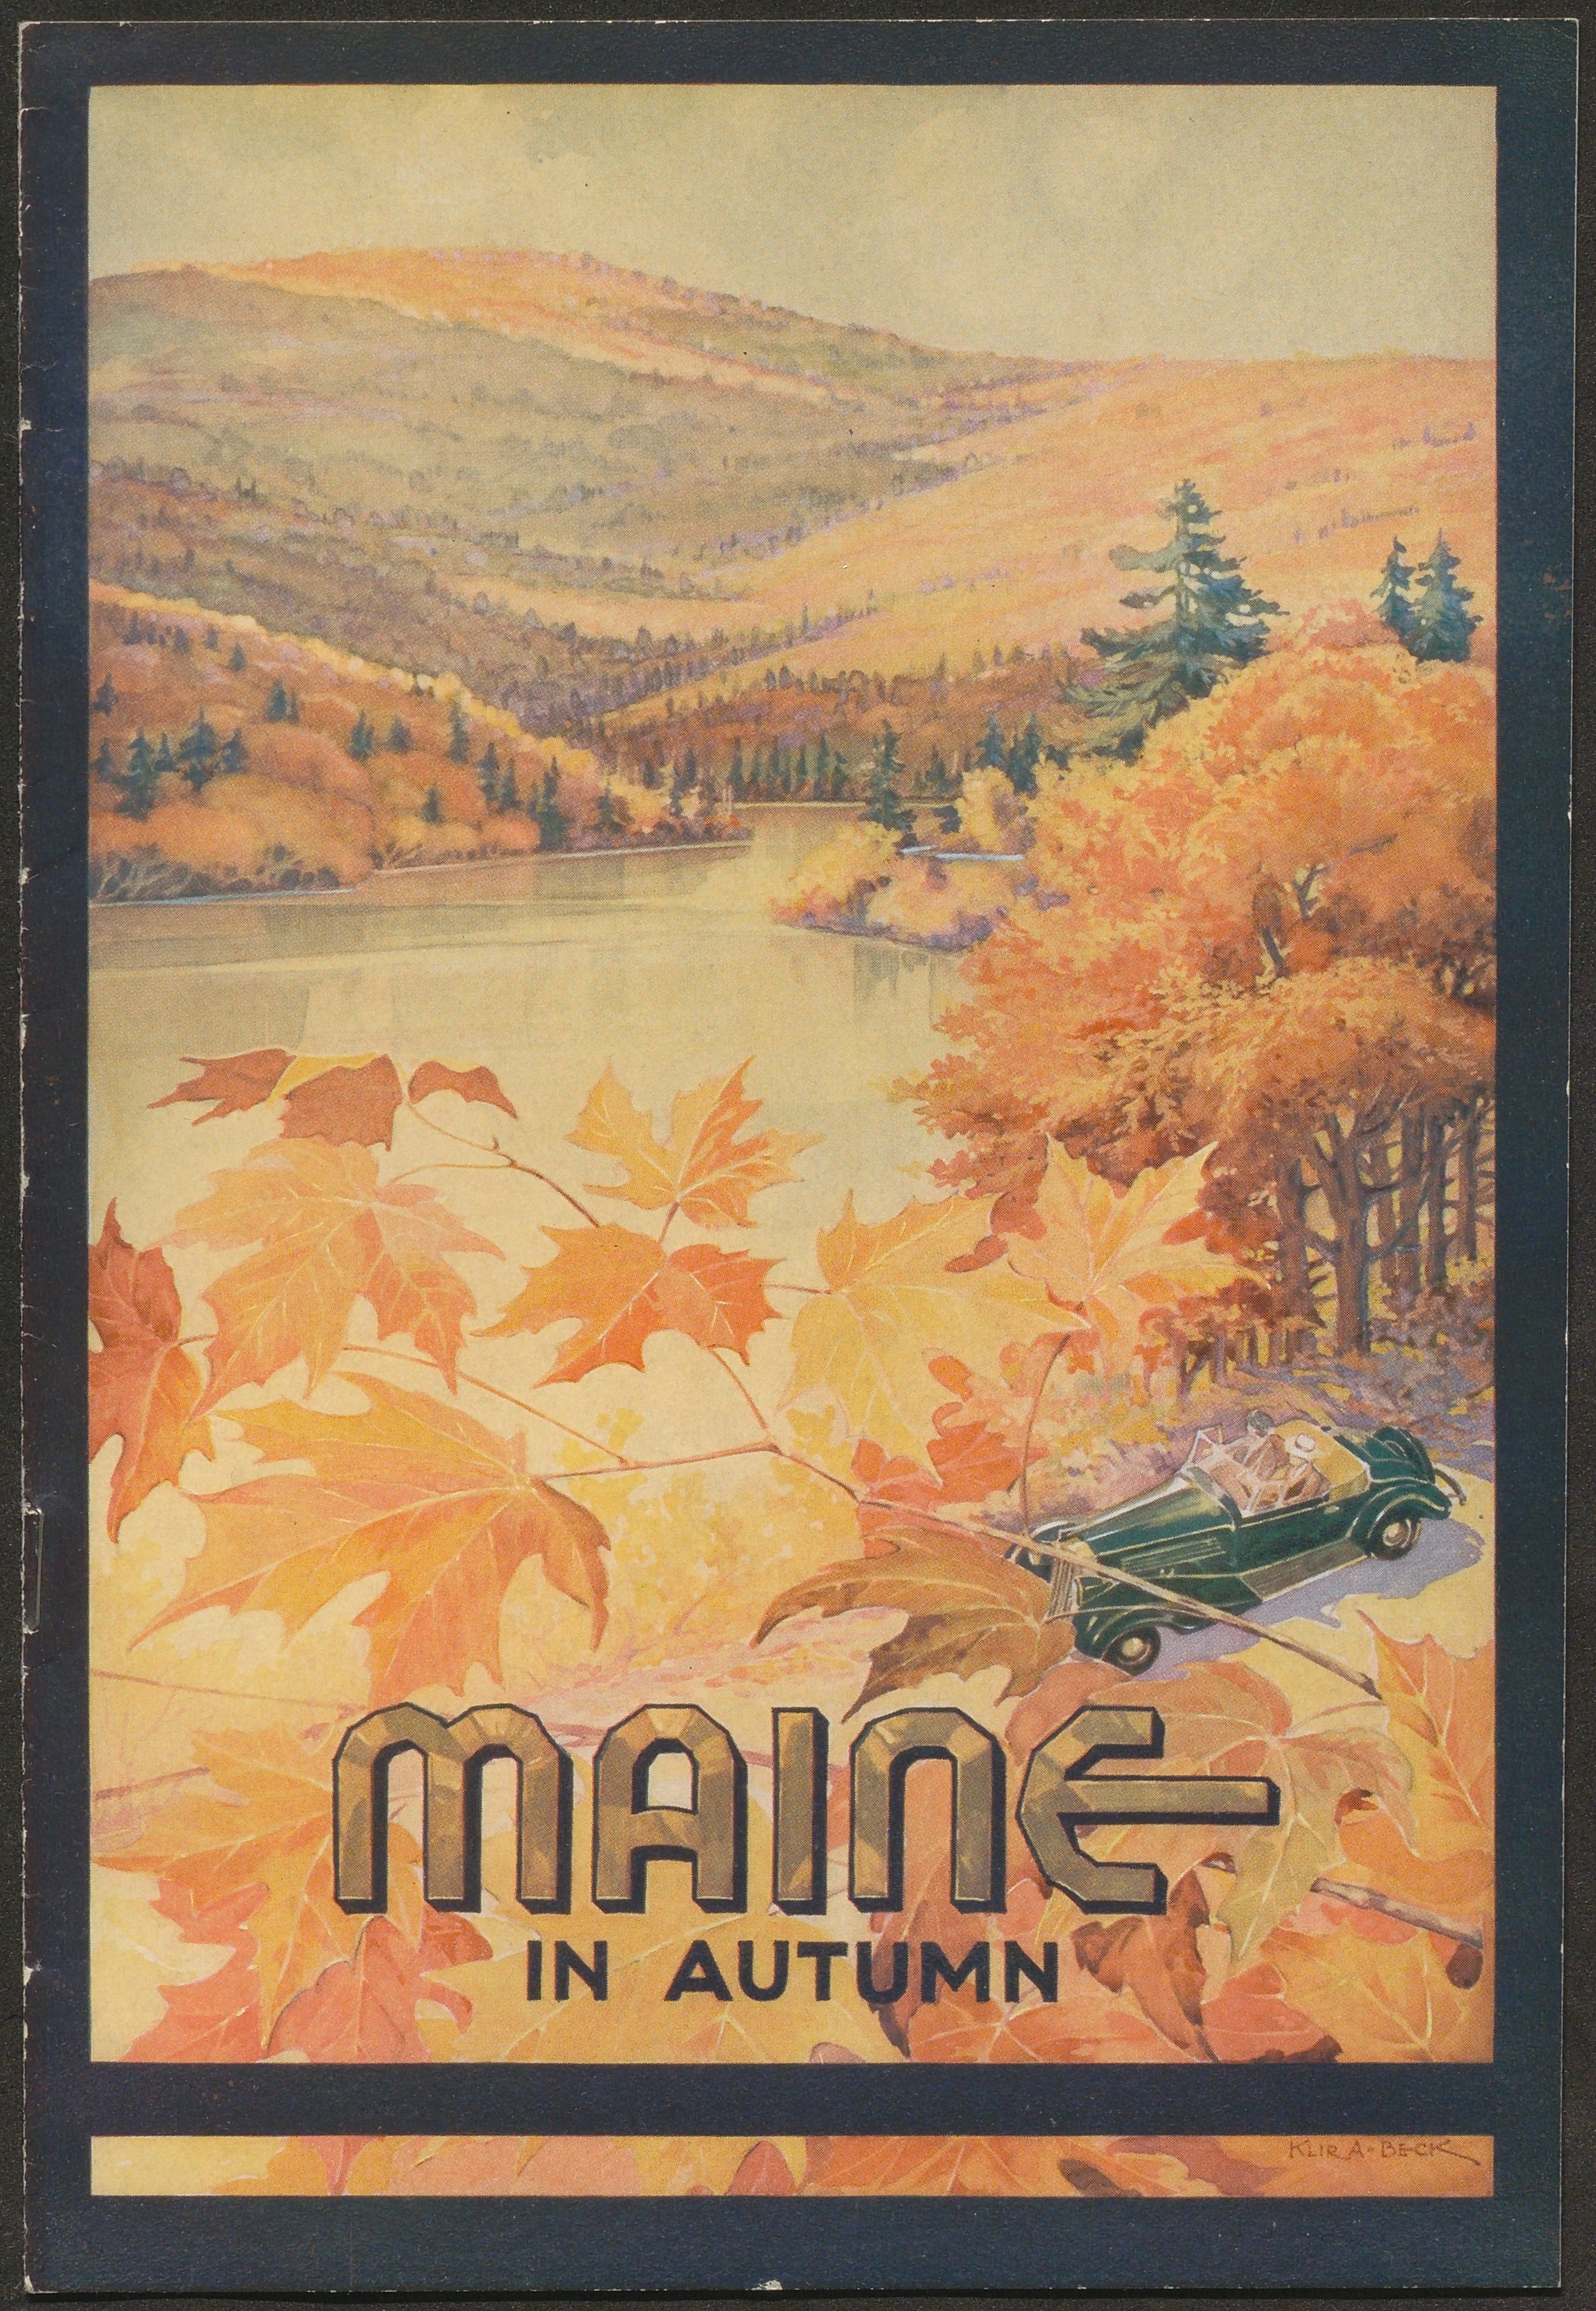 Illustration of an autumn landscape in the state of Maine.